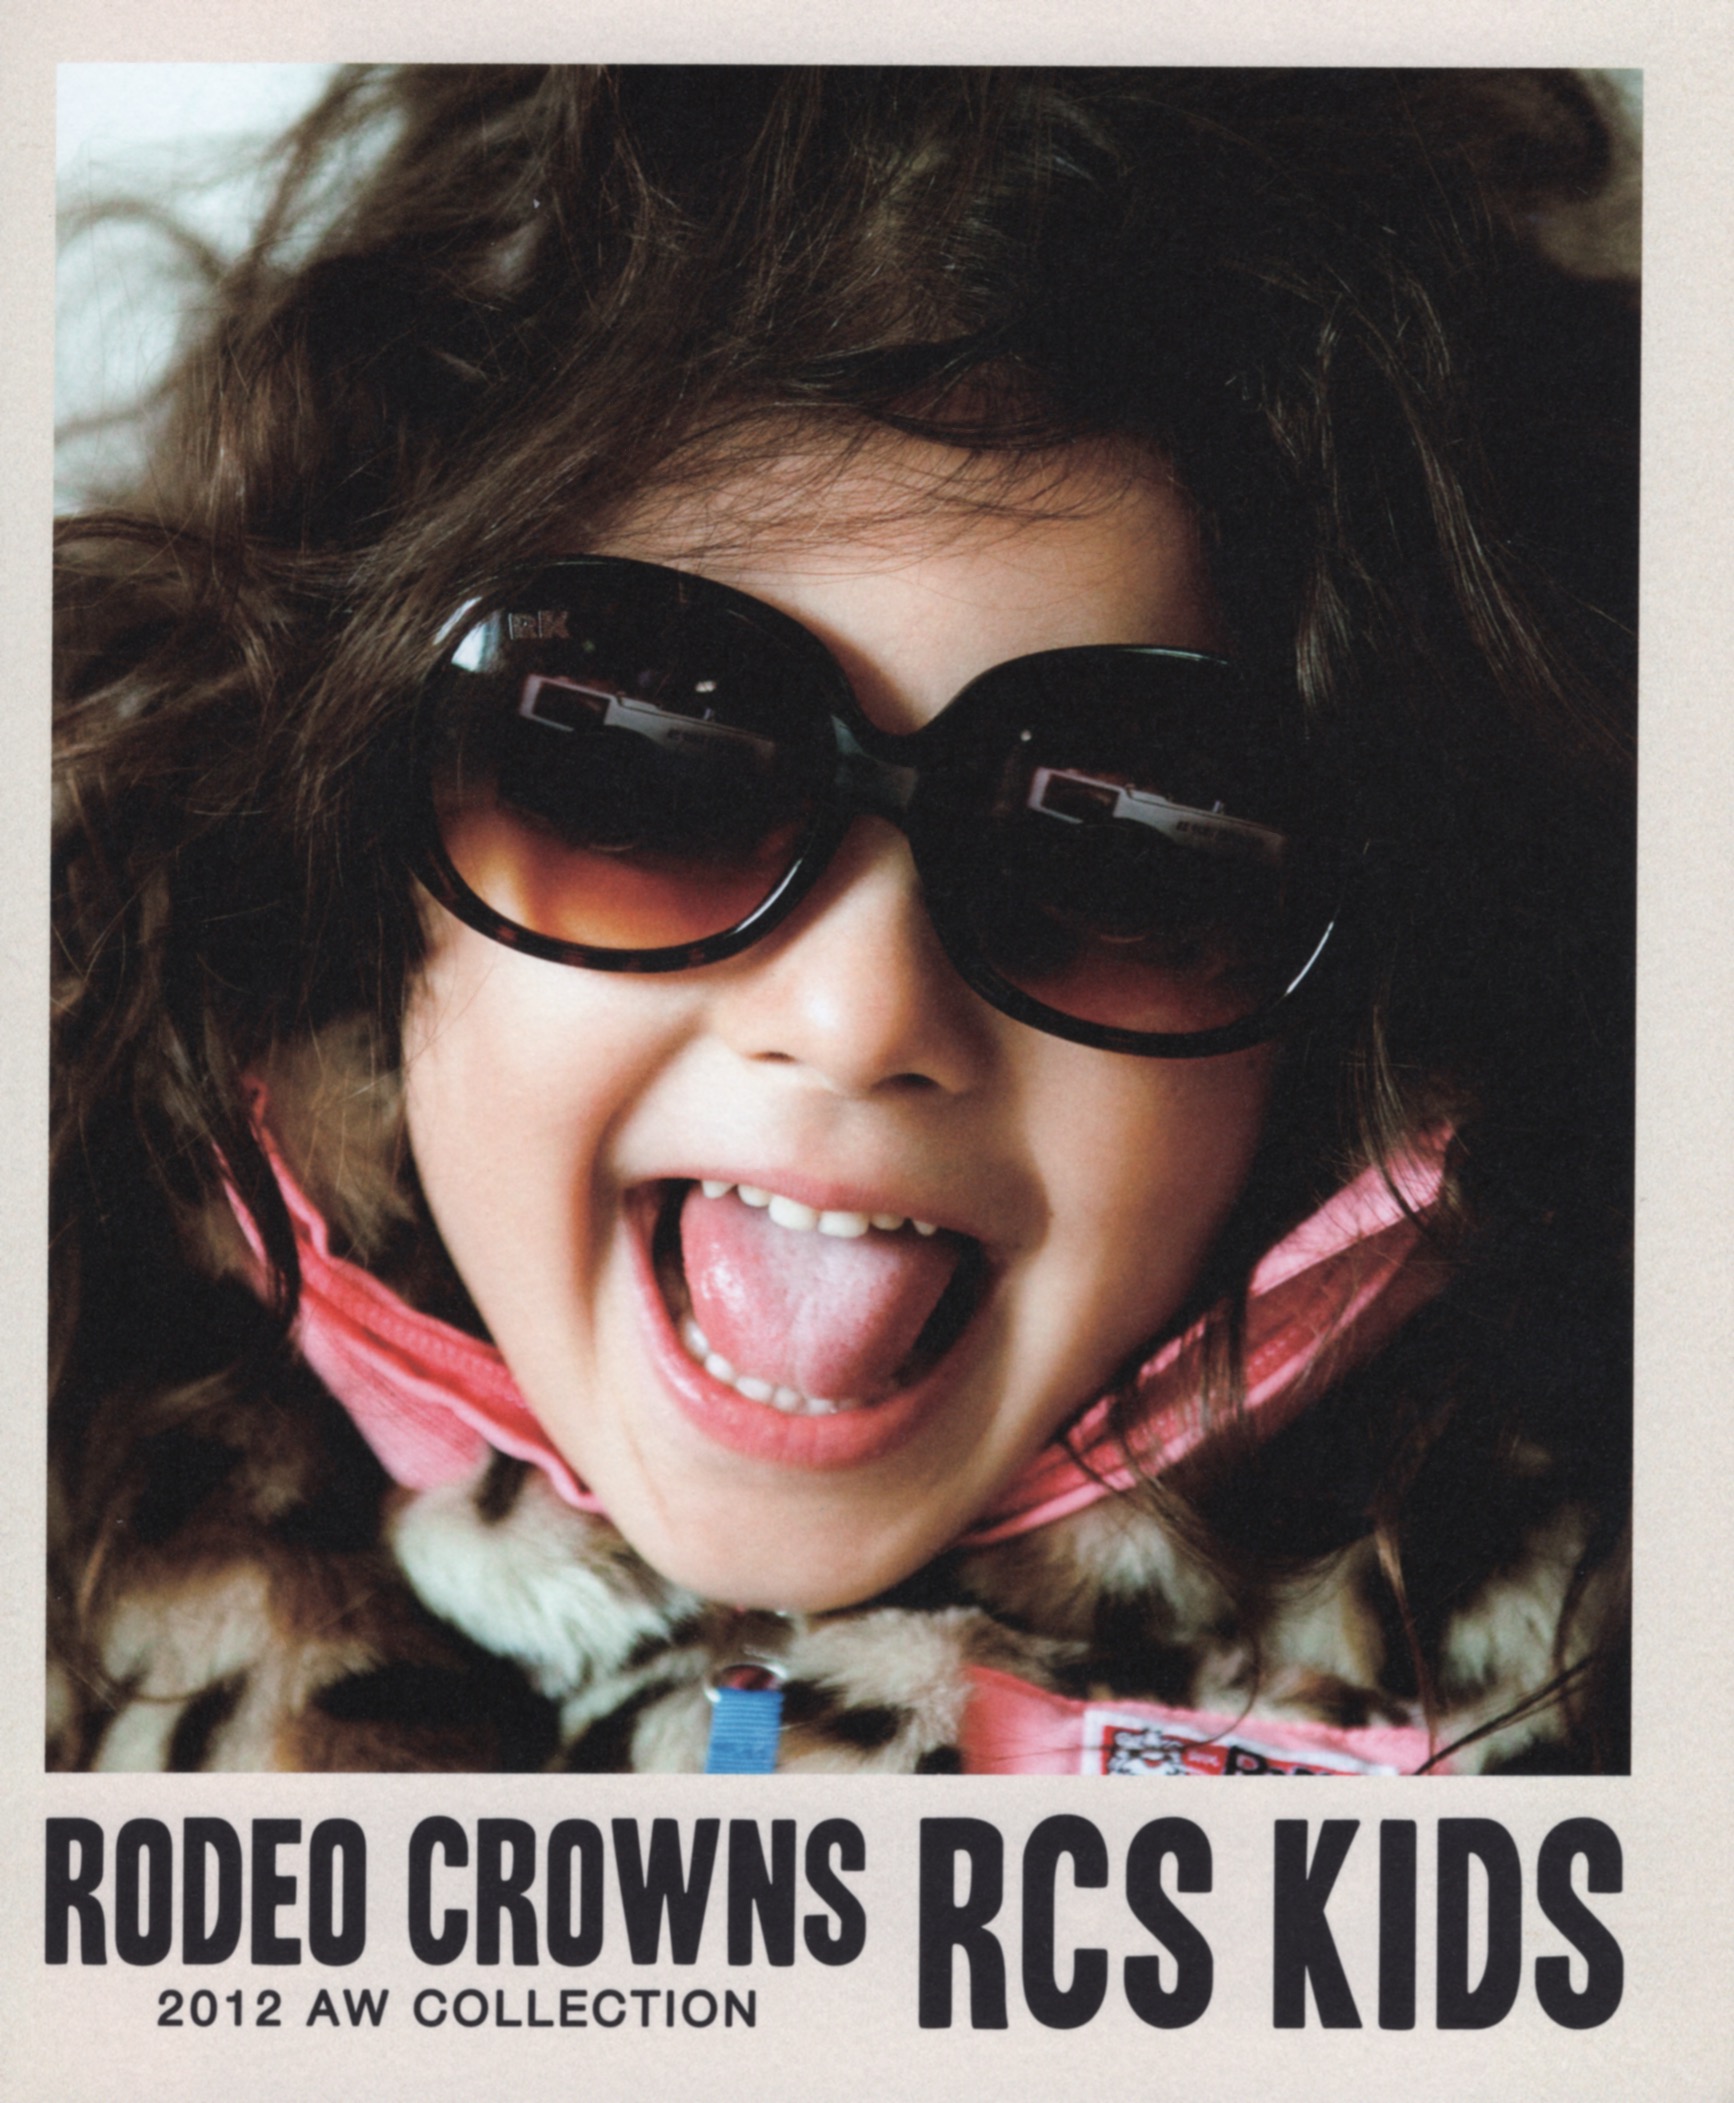 RODEO CROWNS 2012AW